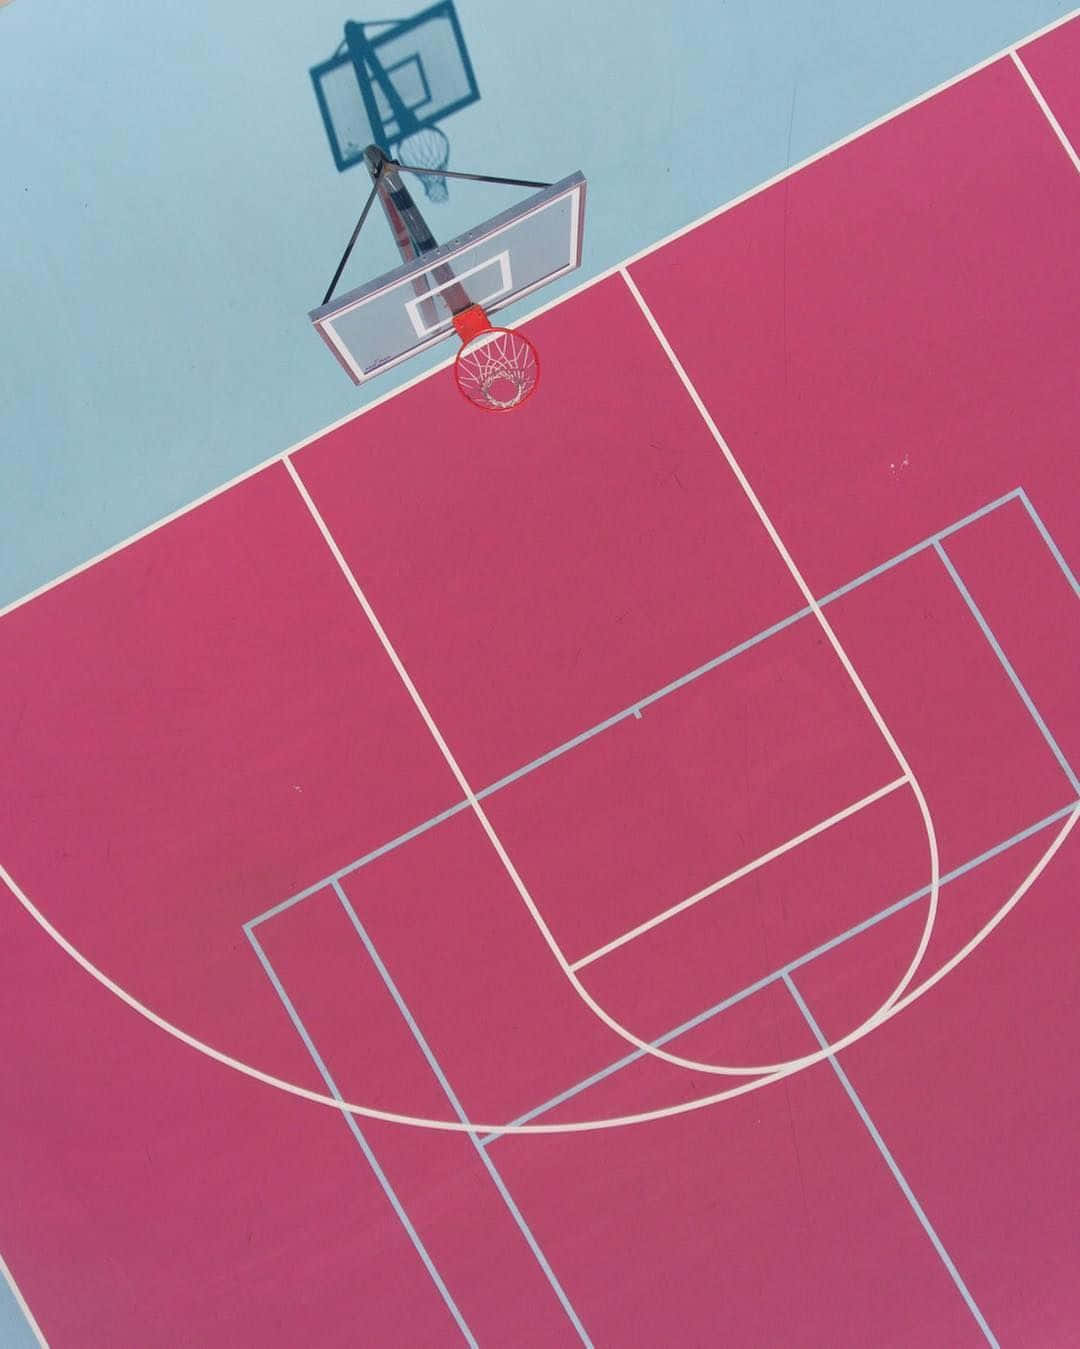 Get ready to take on the competition in style with a Pink Basketball Wallpaper